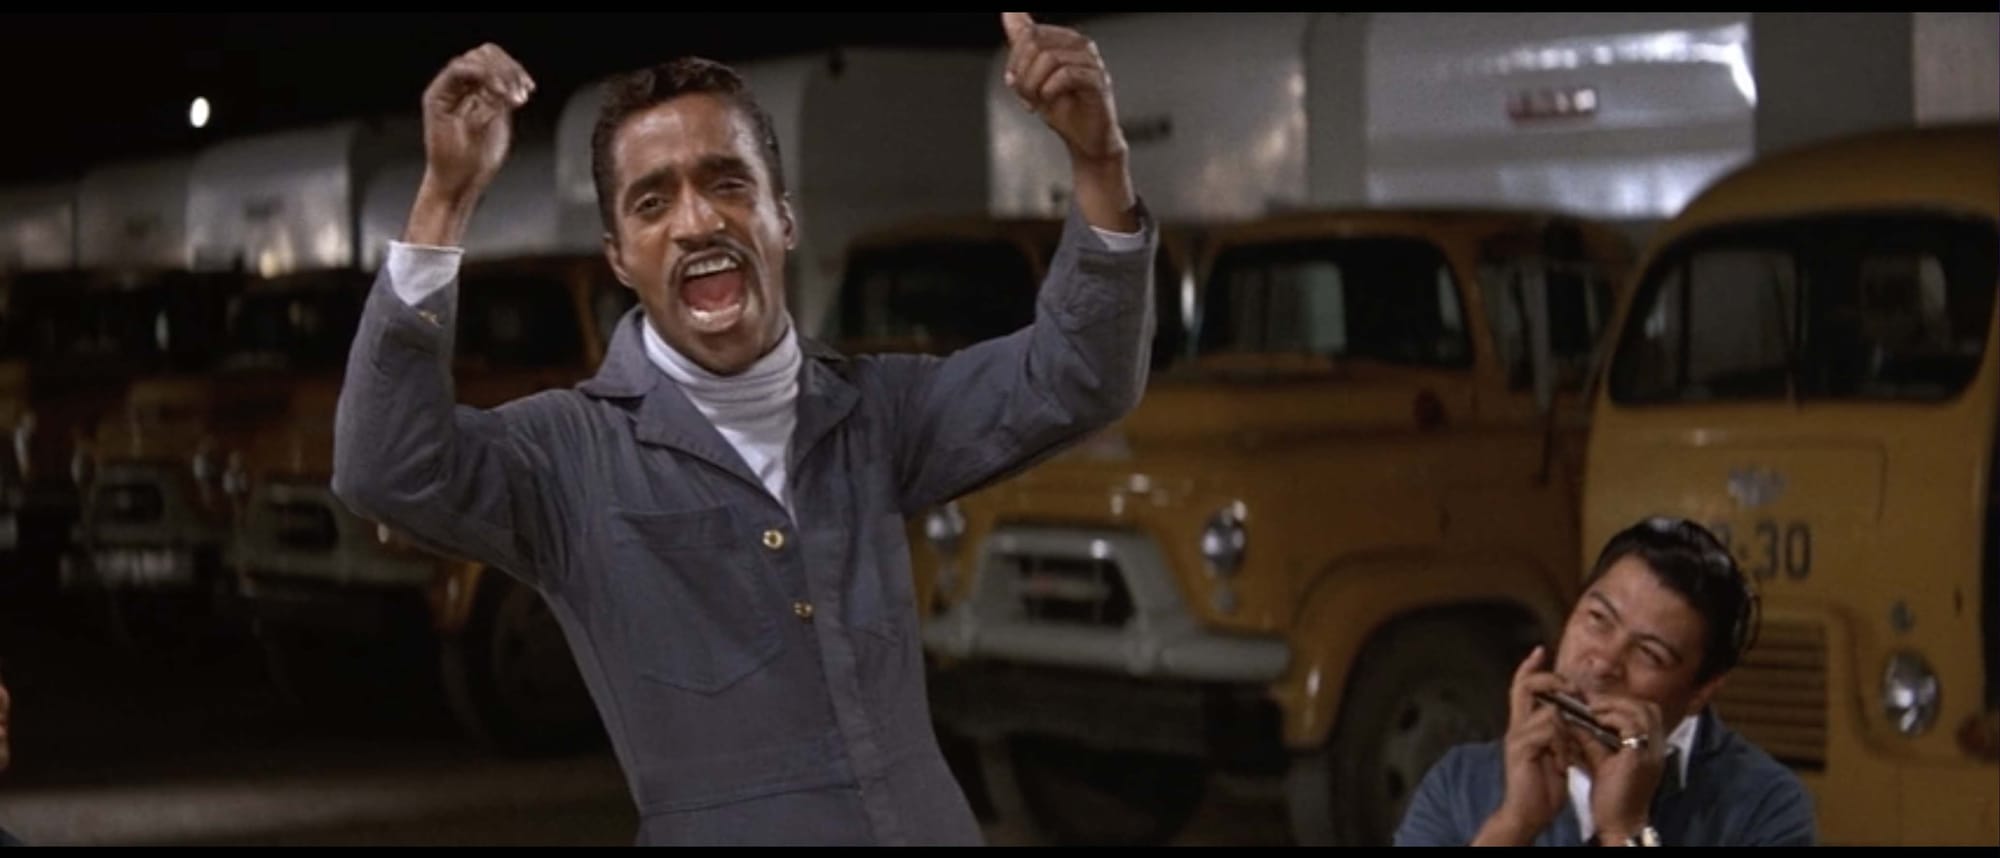 Sammy Davis Jr, shown from the waist up in slim gray coveralls over a white turtleneck, throws up his arms and sings with his mouth wide open. To the right of him are the head, shoulders, and hands of a man in the same outfit playing a tilted harmonica. Behind them, in the dark, a line of garbage trucks with shiny yellow cabs and white bodies recedes from right to left.